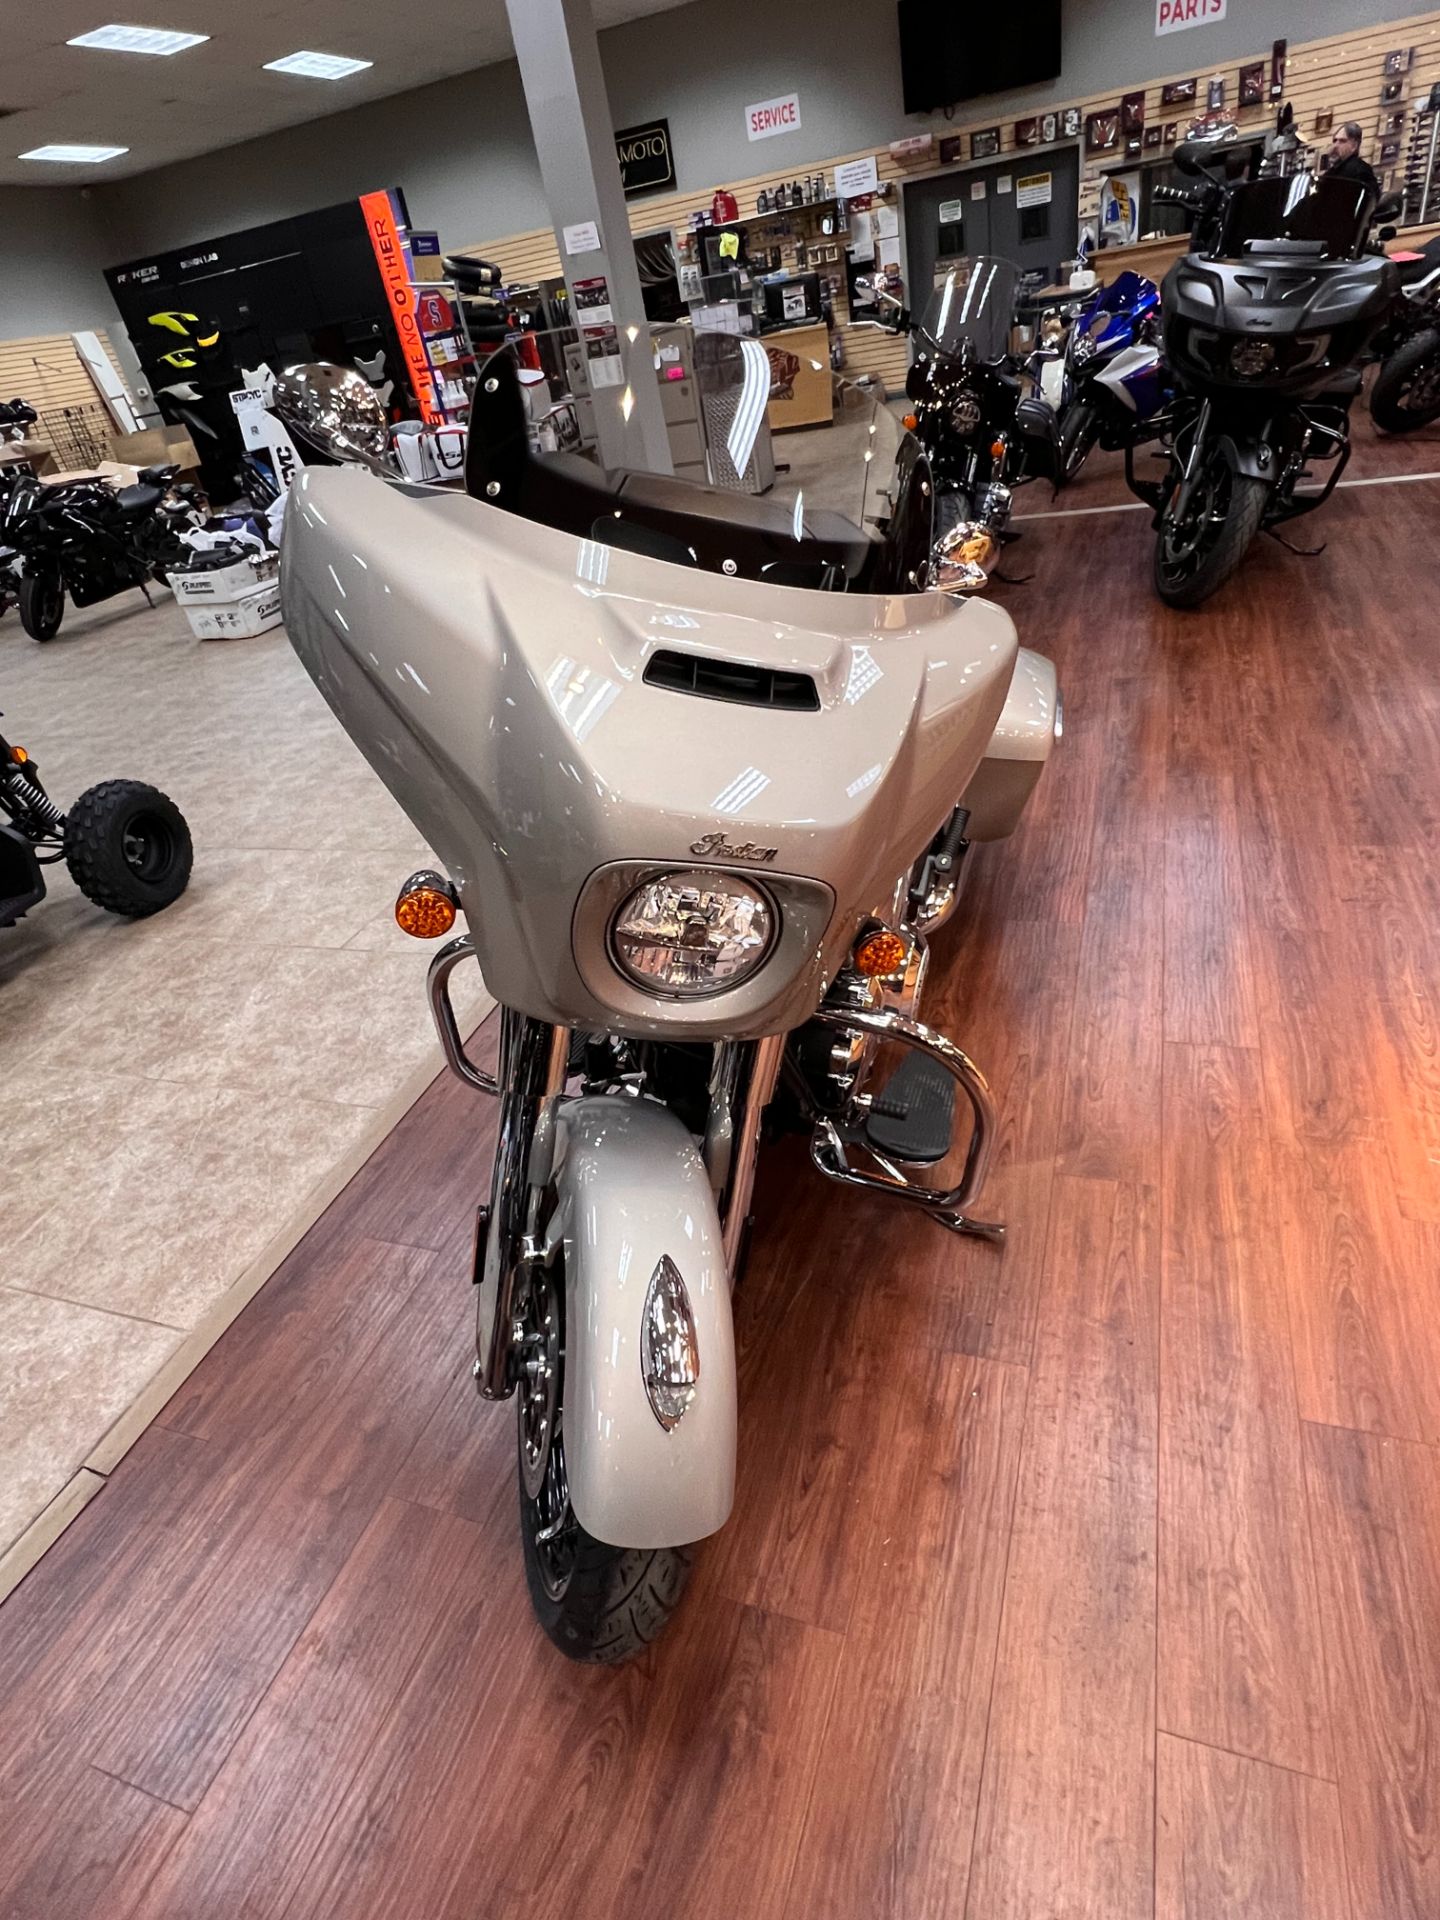 2022 Indian Chieftain® Limited in Mineola, New York - Photo 4